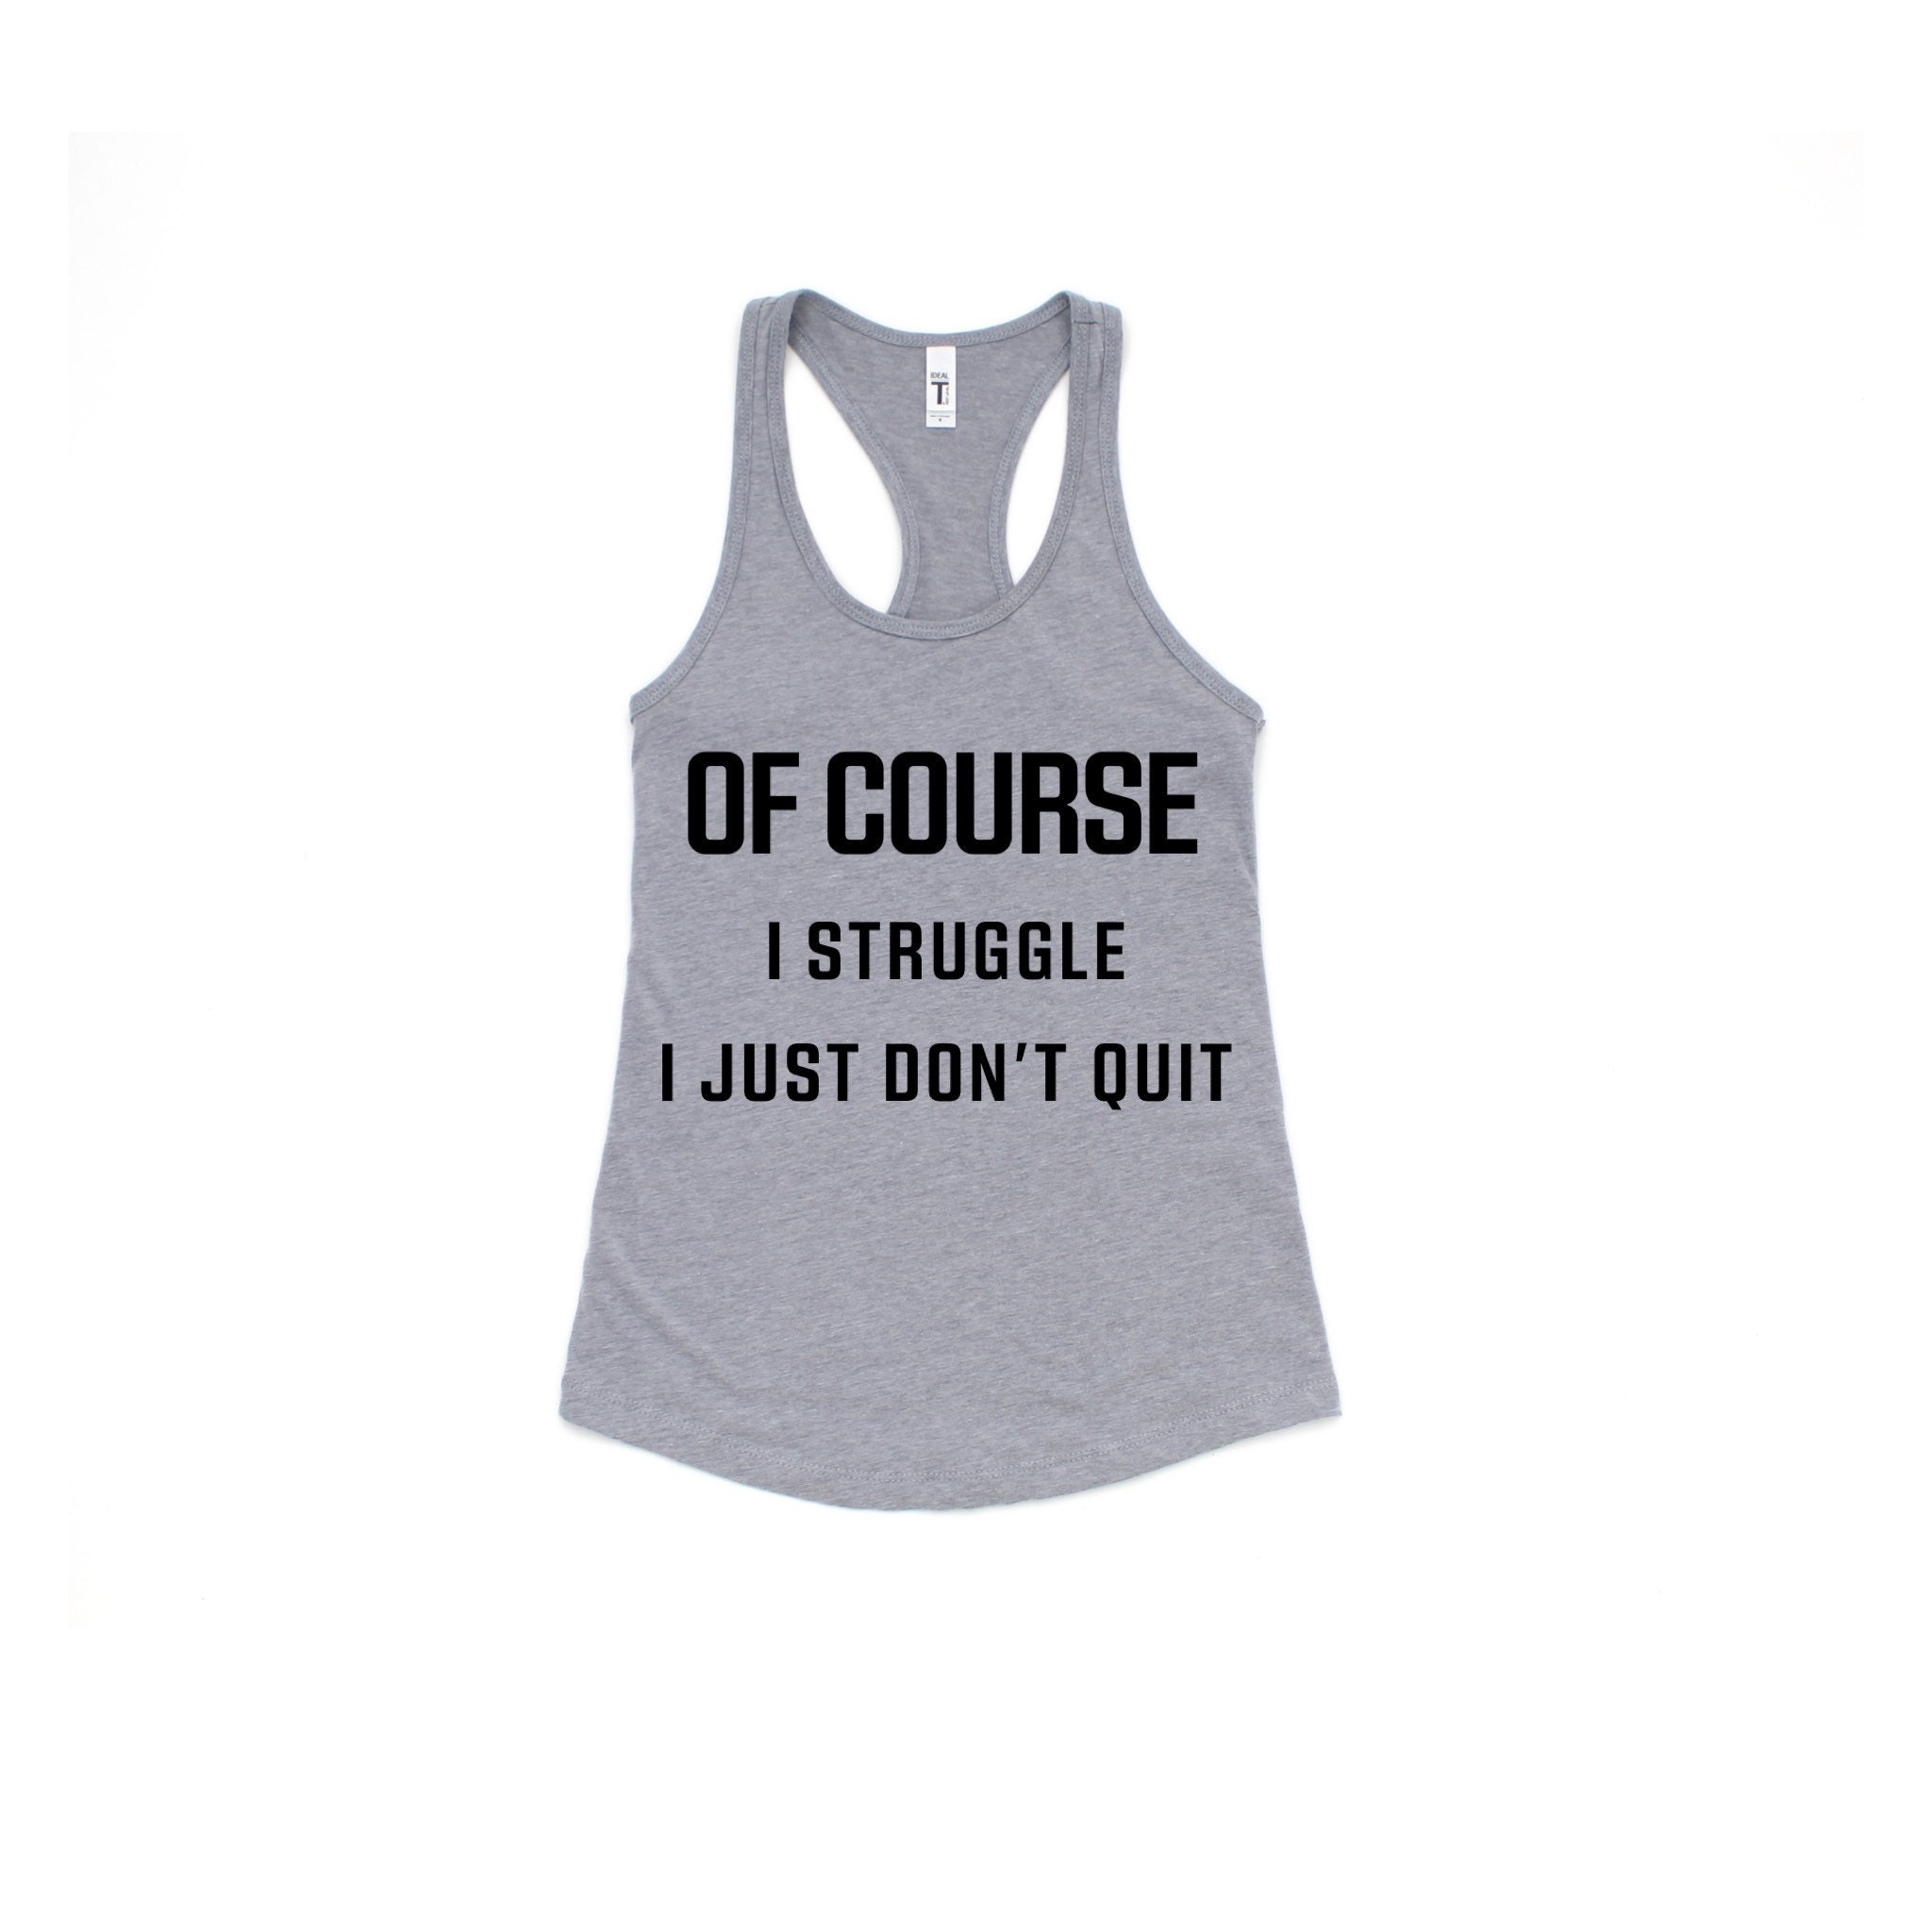 Of Course I Struggle Workout Tanks for Women Workout Tank | Etsy